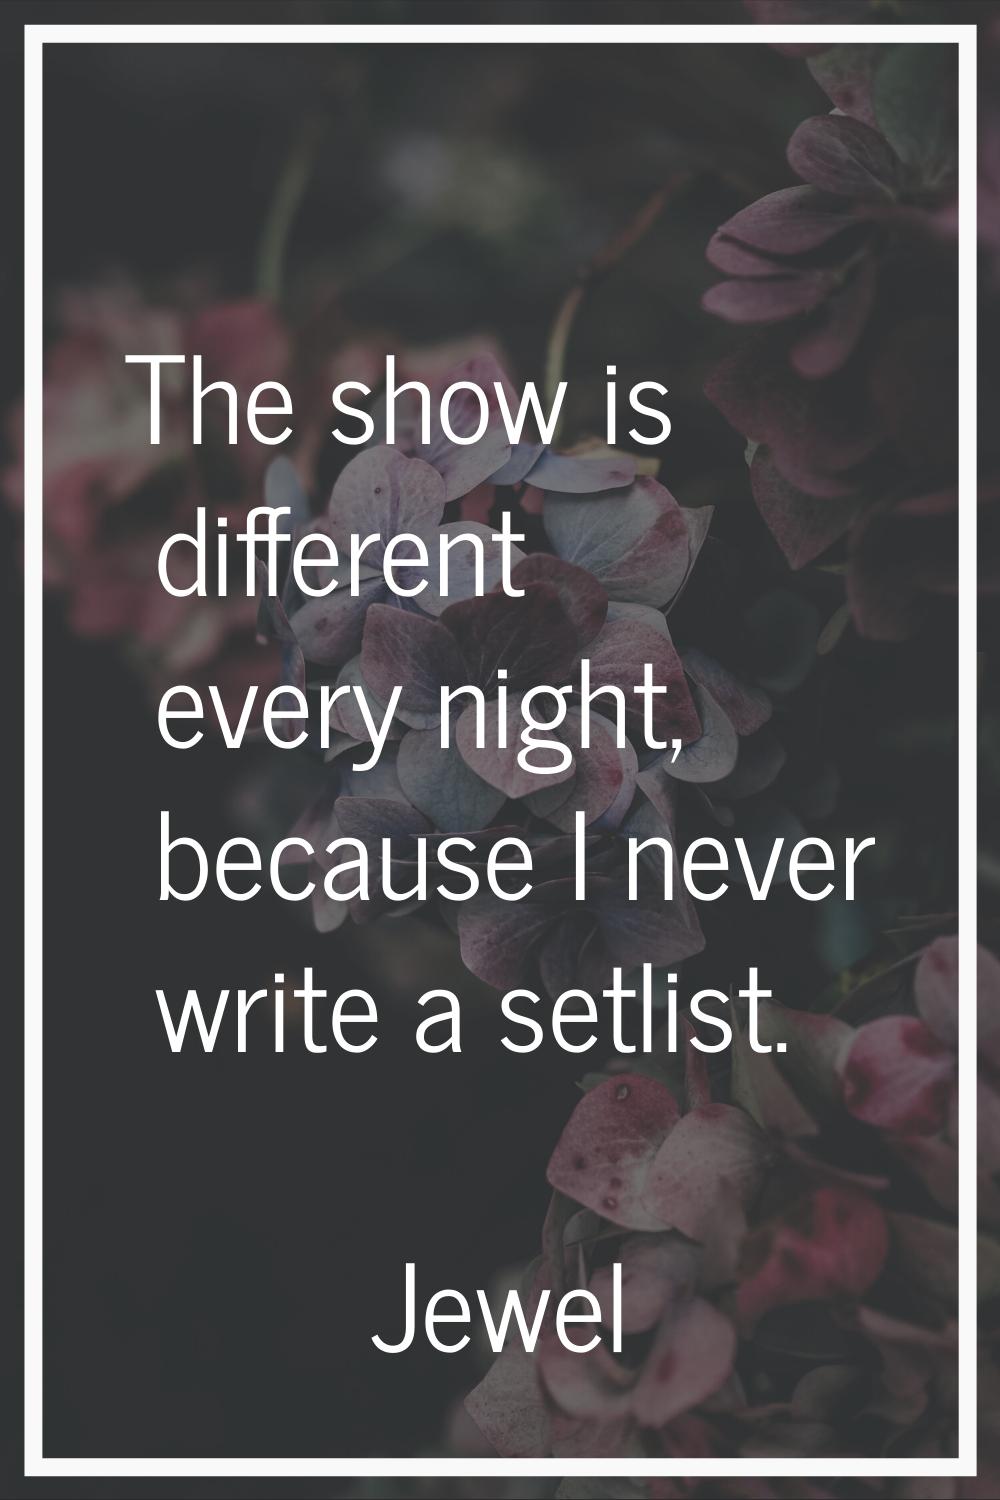 The show is different every night, because I never write a setlist.